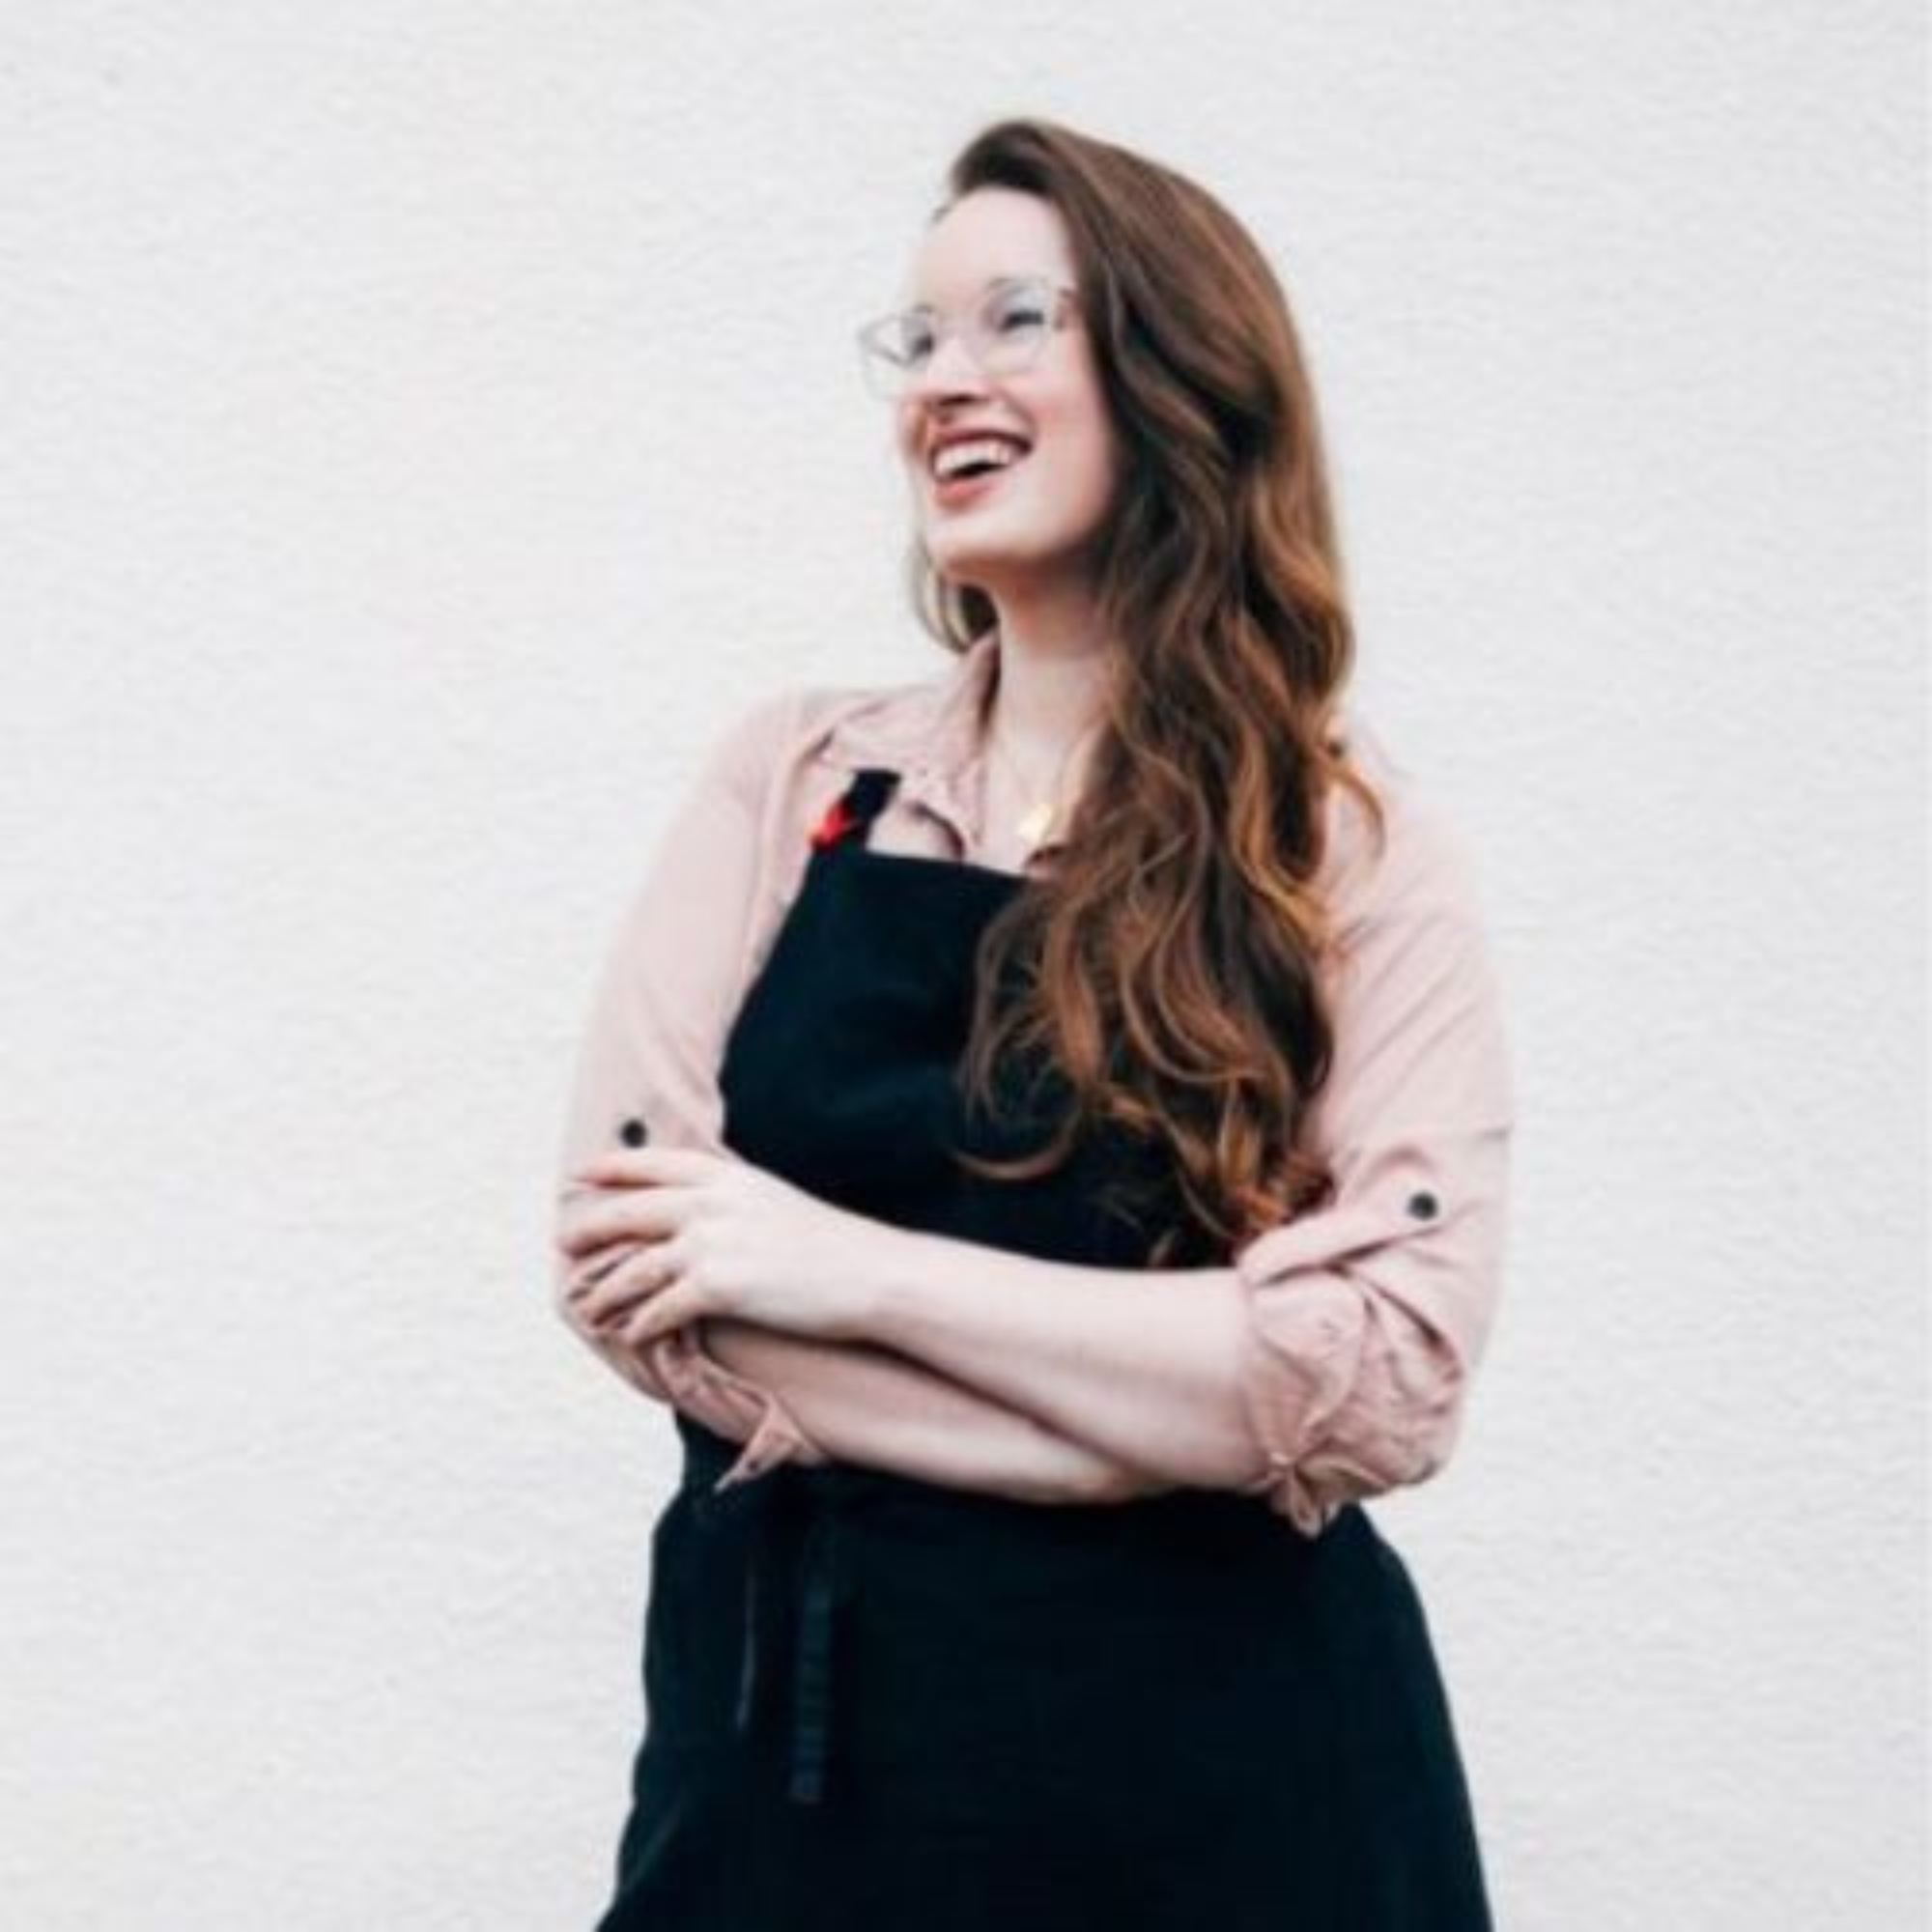 Emily Laurae in apron standing against white wall